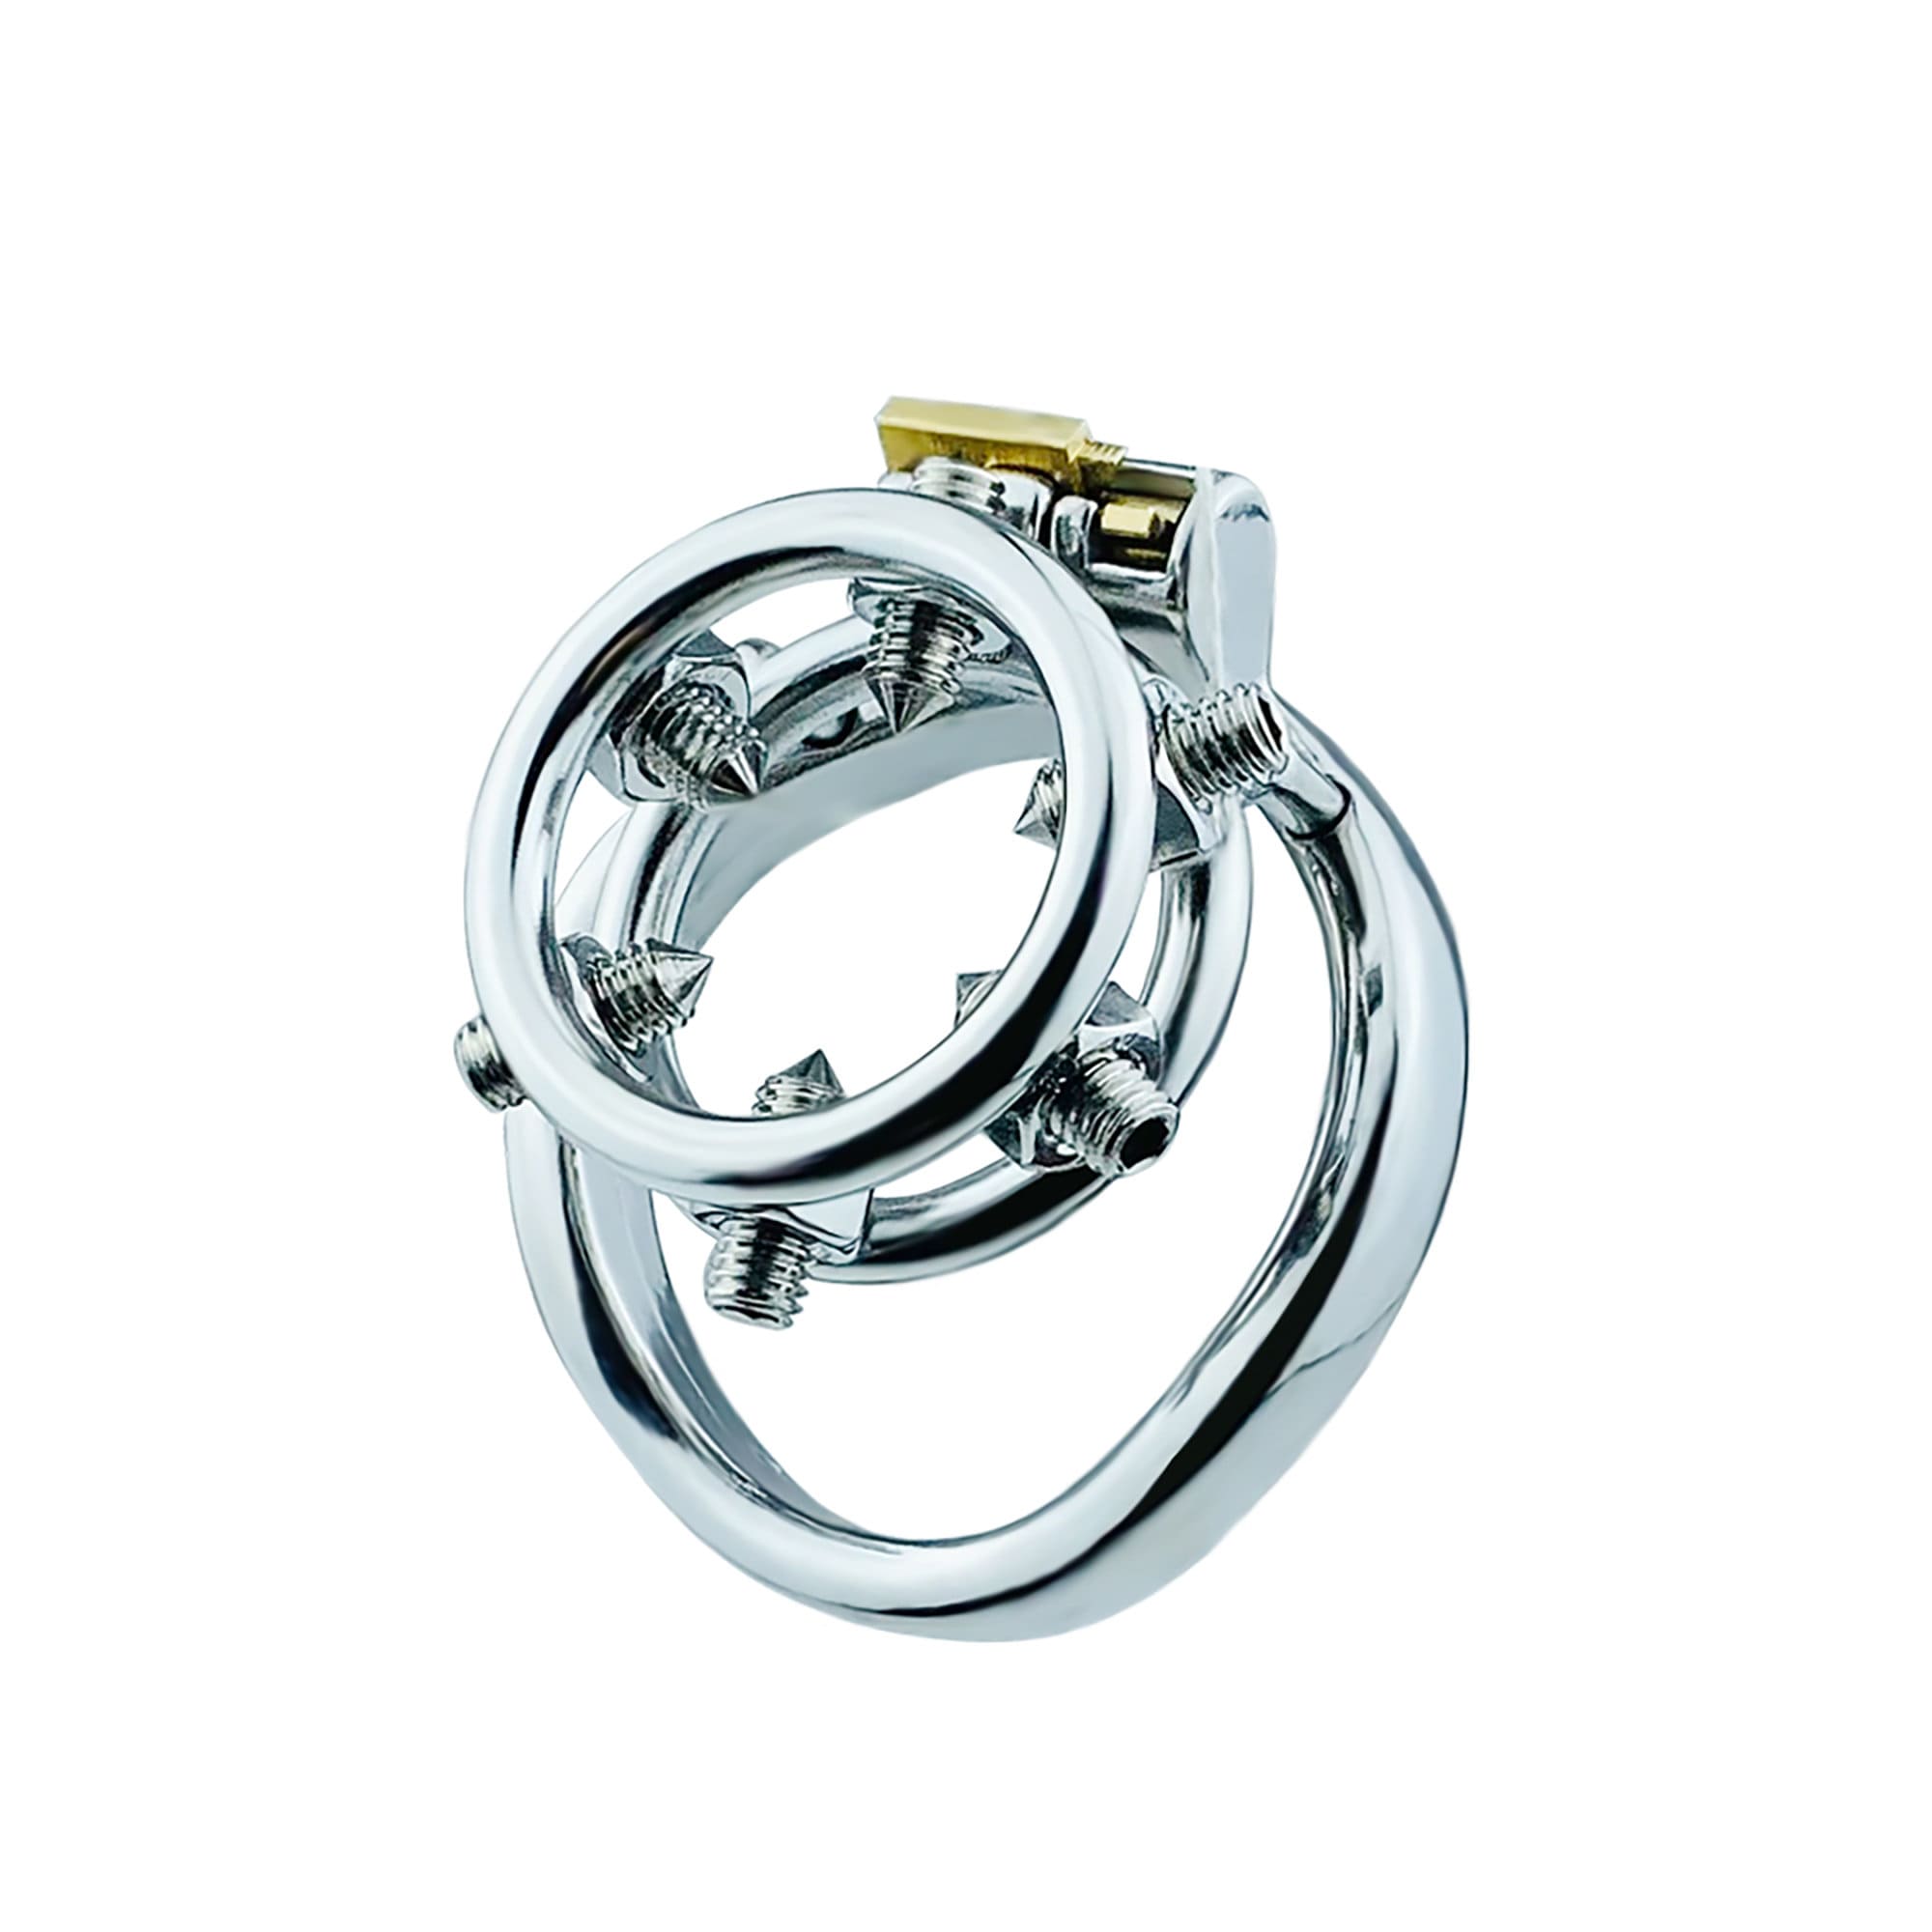 Spiral Penis Ring Cock Ring Male Erection Keeper Glans Ring Men's Bondage  Intimate Jewellery Adult Bdsm Sex Toy / Body Jewellery Silver 